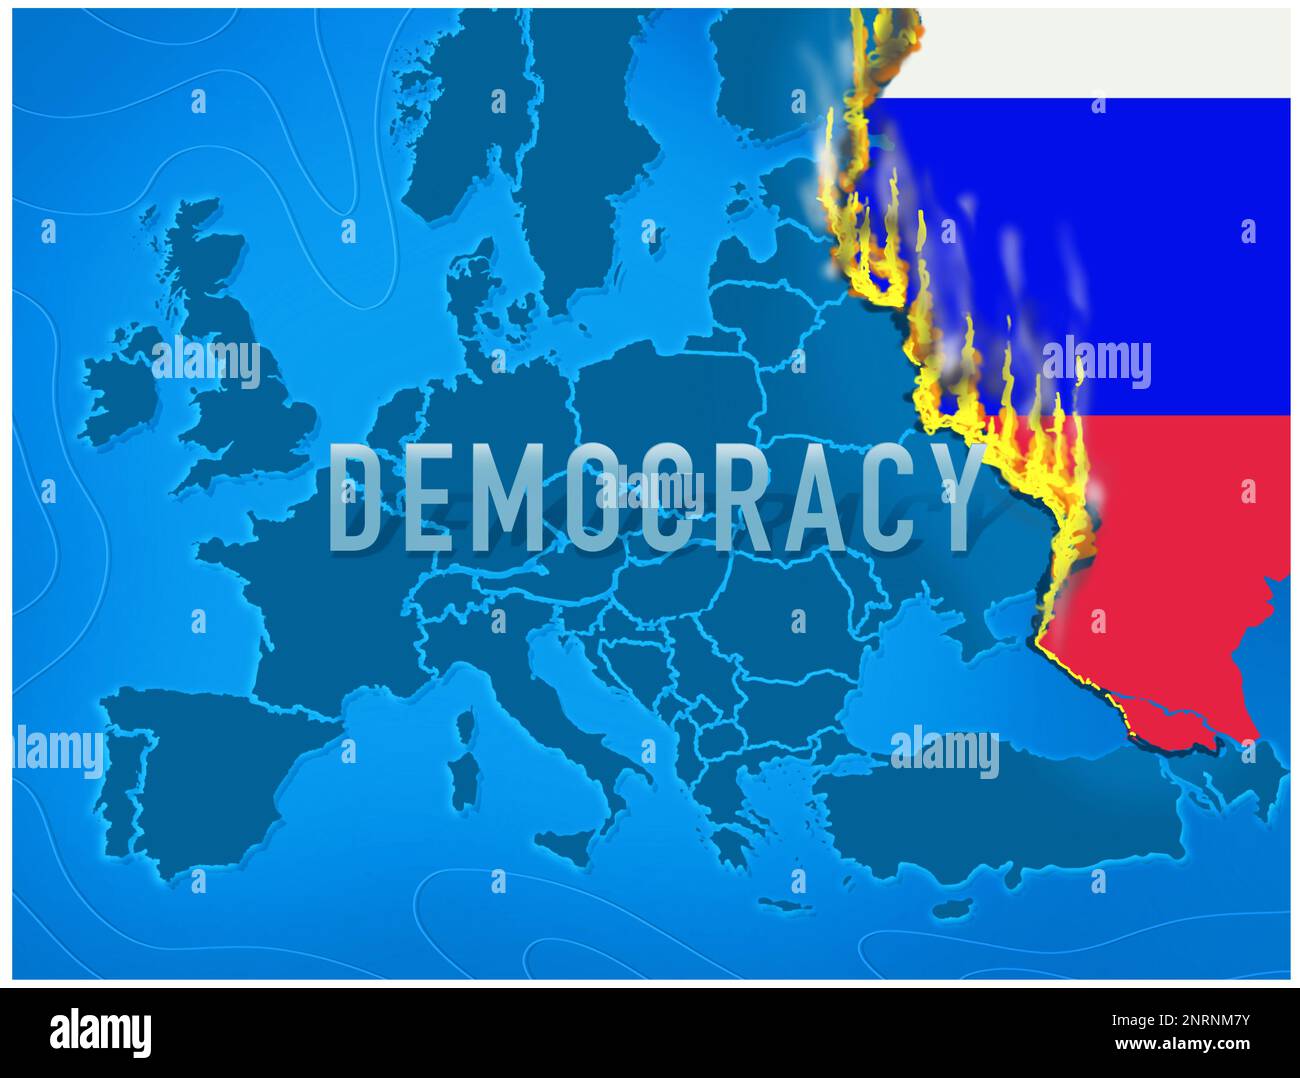 Democracy illustration with flames burning down edge of Europe. Concept illustration of conflict in Europe. Stock Photo